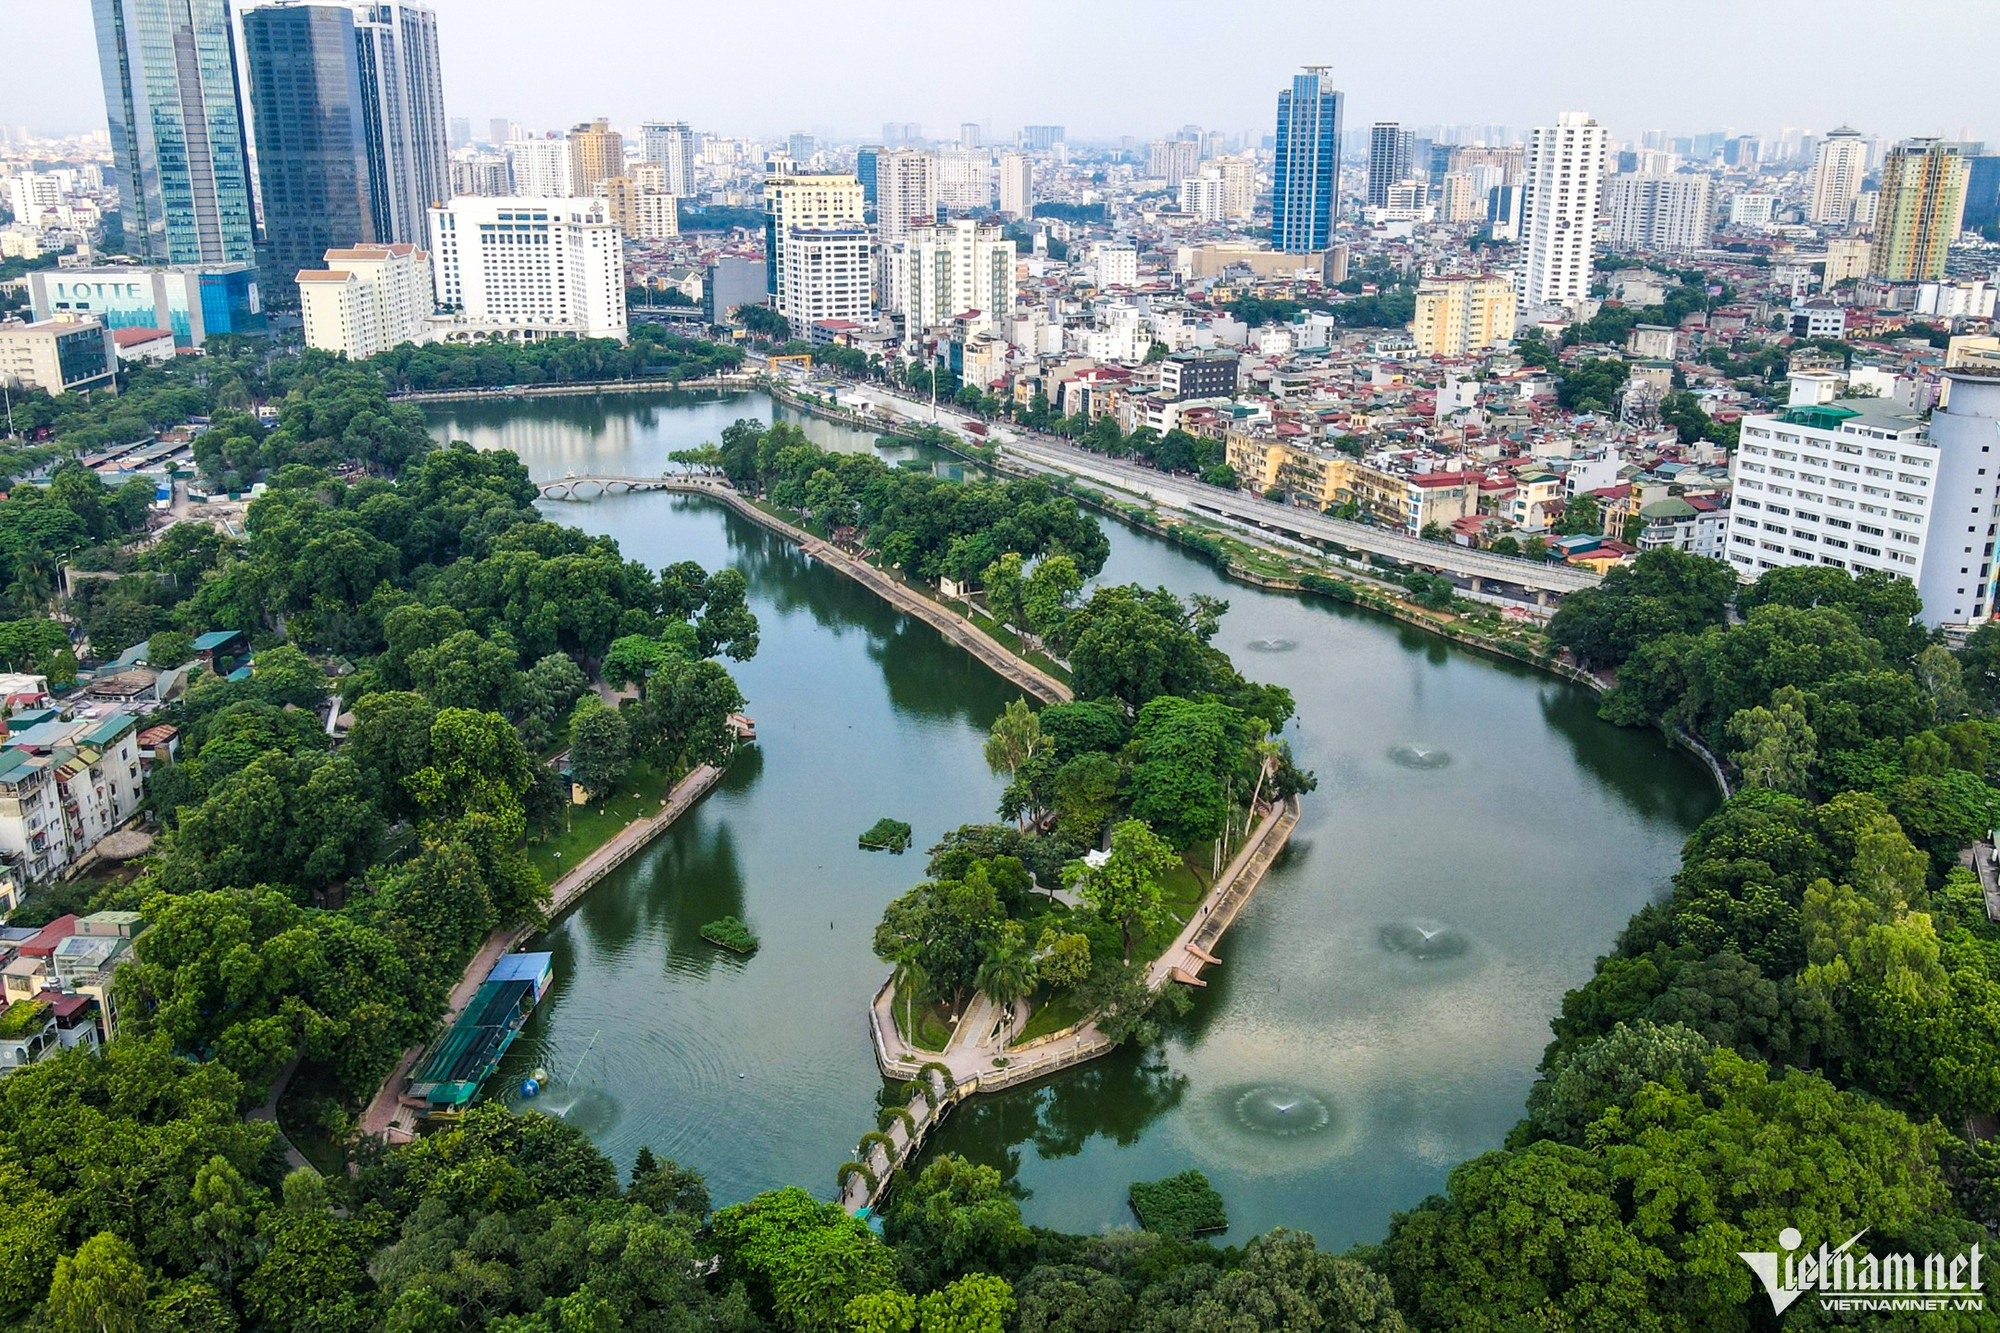 Hanoi’s three largest parks are seriously degraded